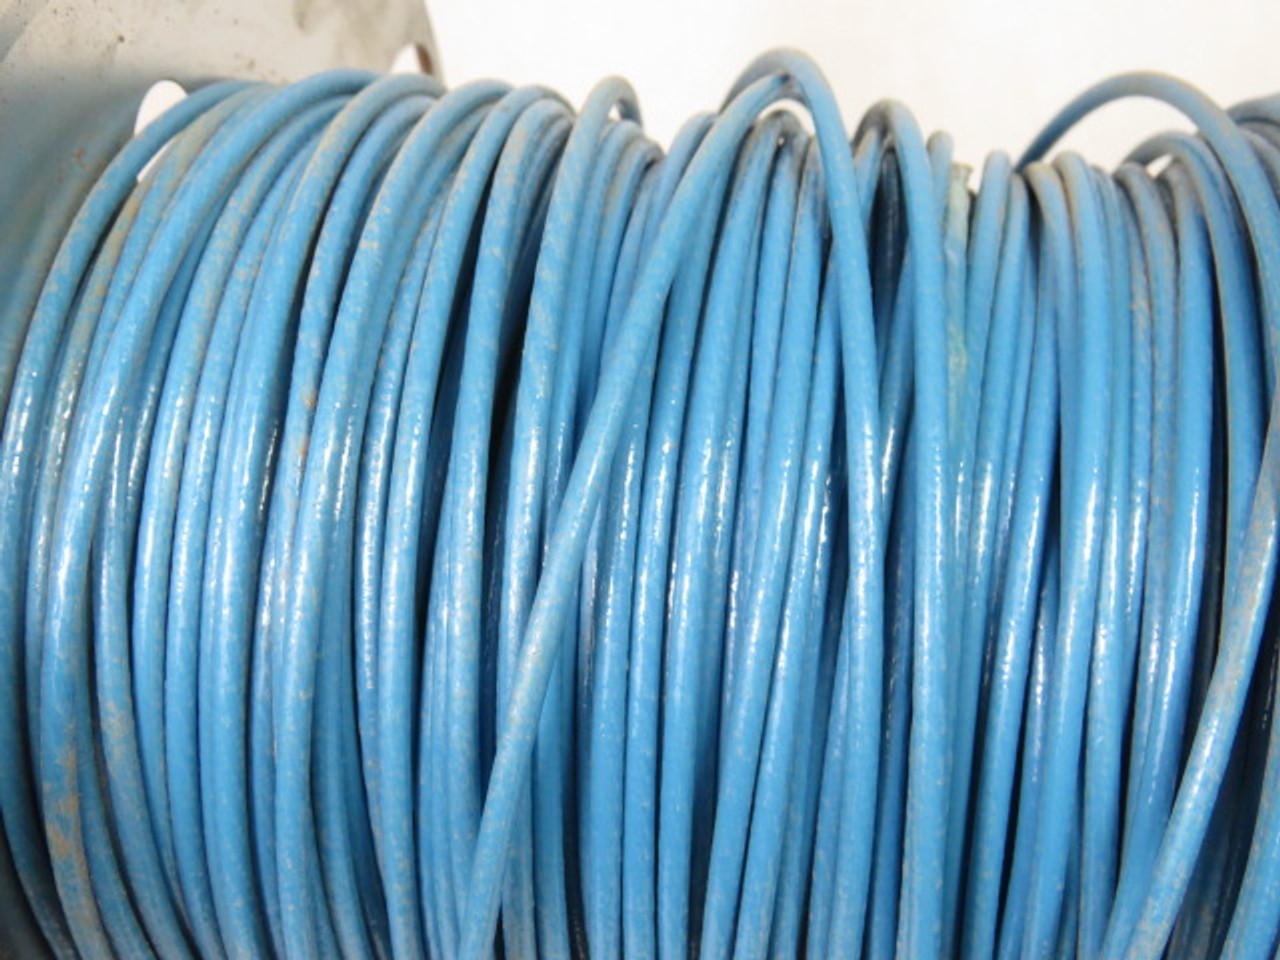 Generic 12/19 Machine Tool Wire 12 Awg 19 Str. 285ft BLUE USED